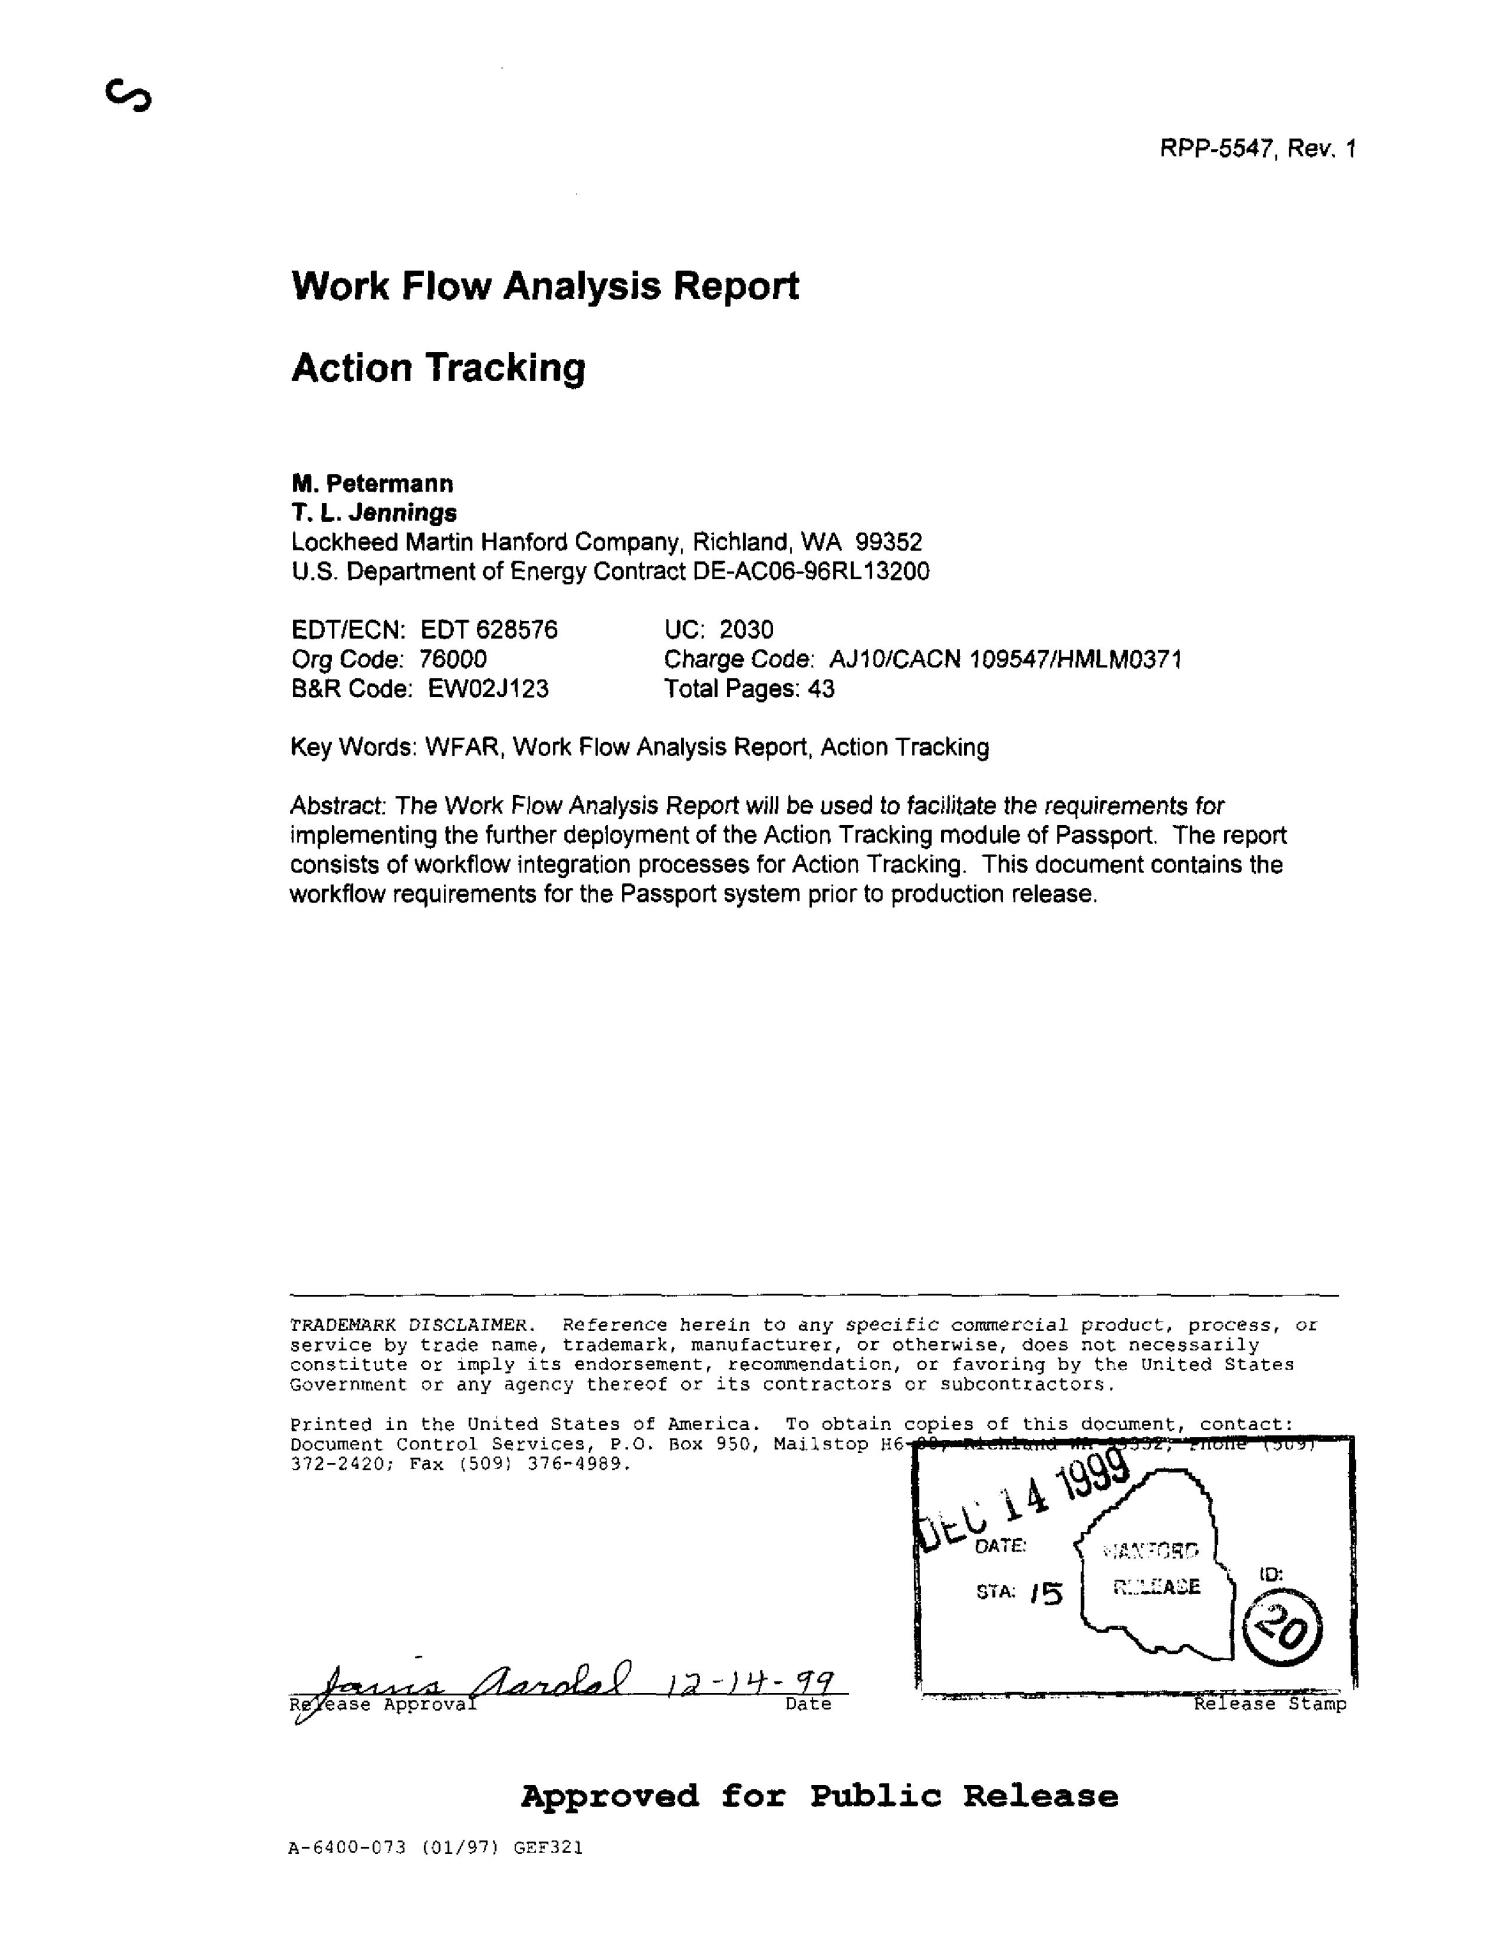 Work Flow Analysis Report Action Tracking
                                                
                                                    [Sequence #]: 3 of 45
                                                